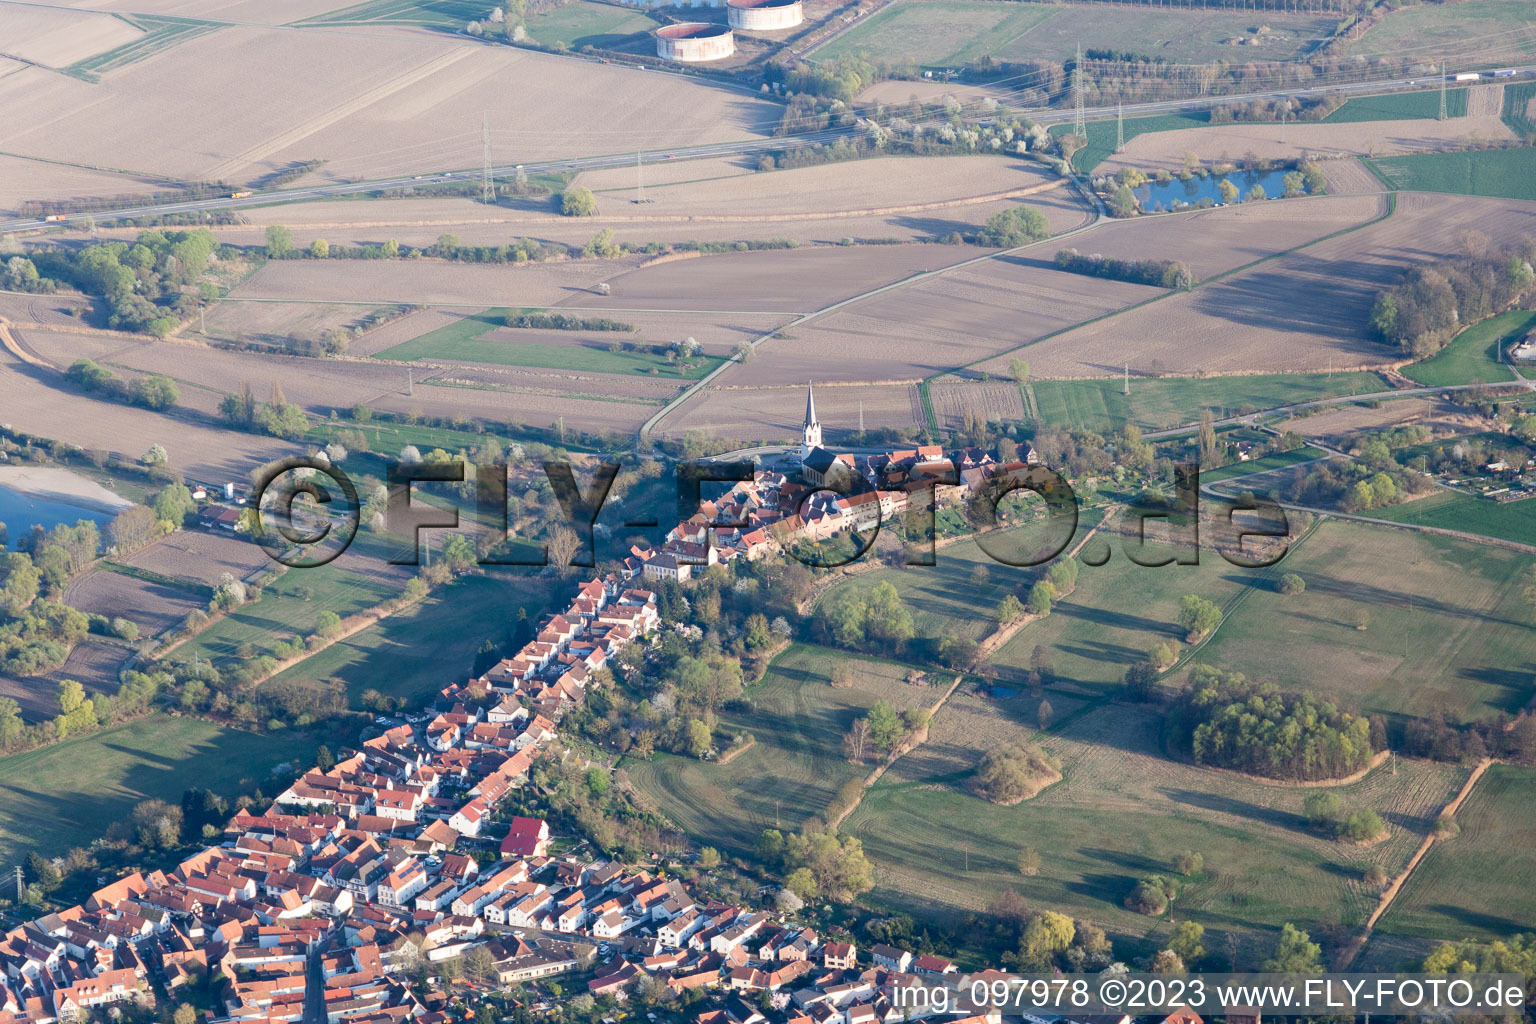 Jockgrim in the state Rhineland-Palatinate, Germany from the plane